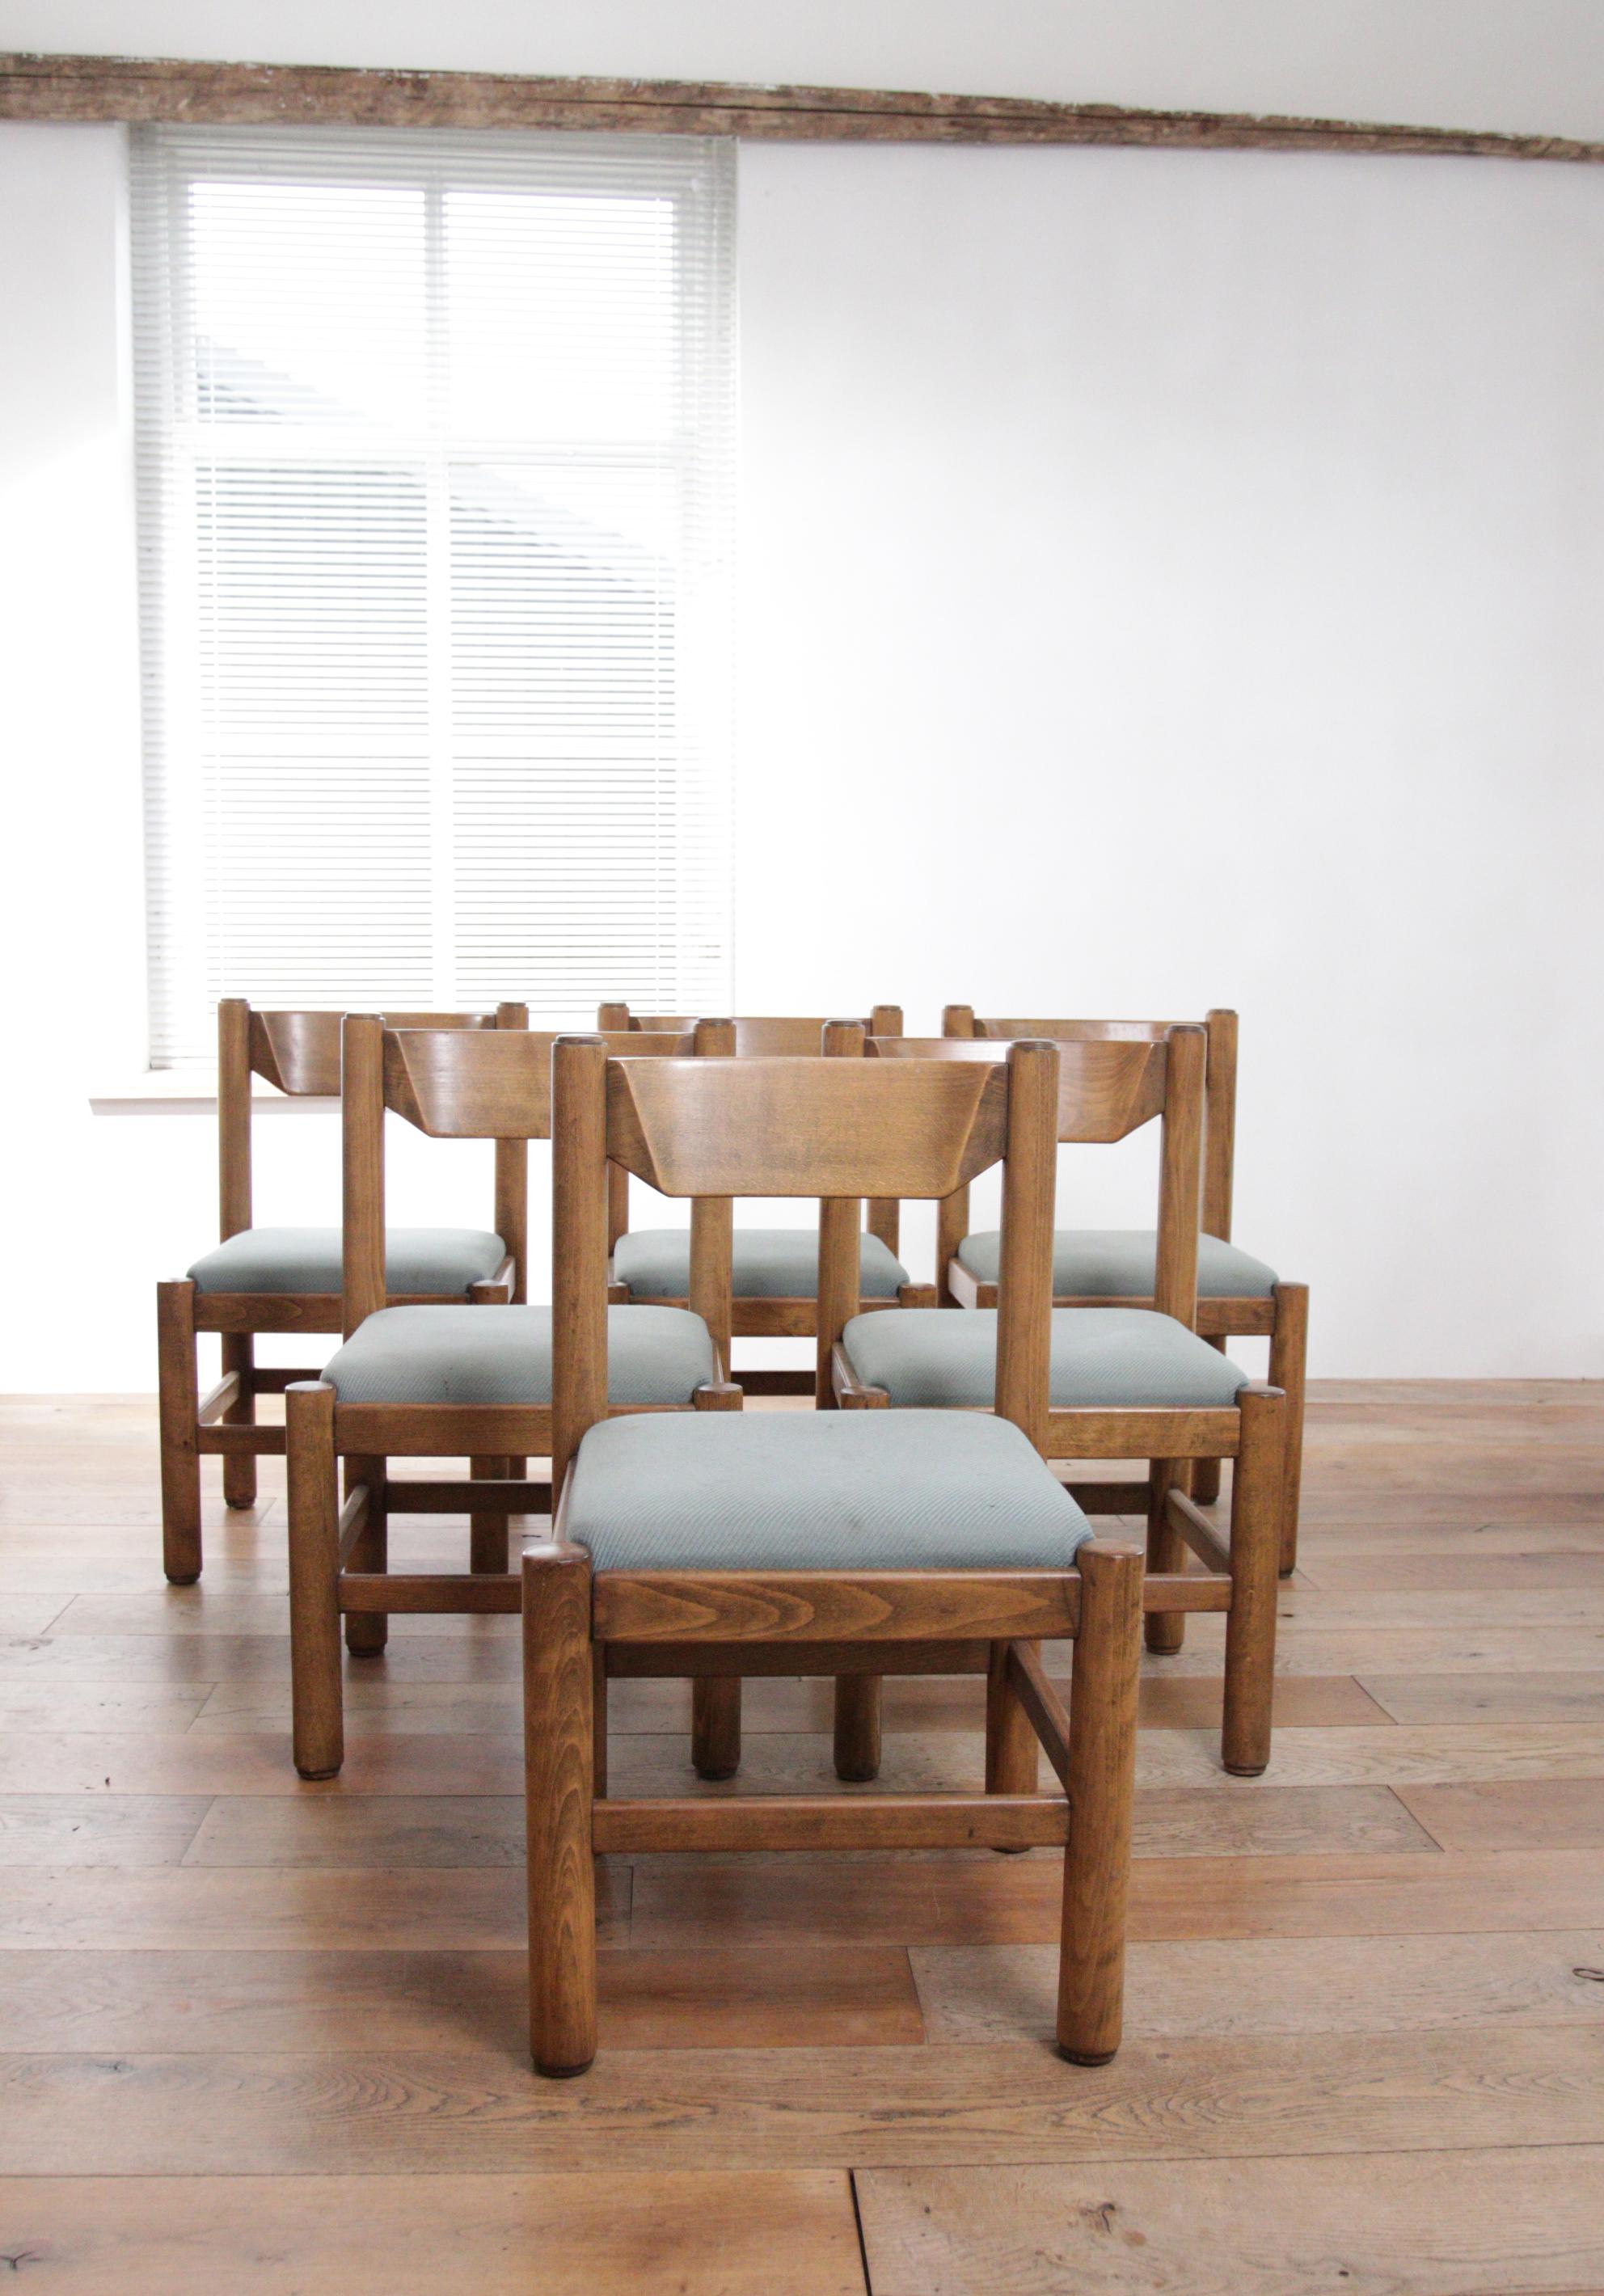 Beautiful design dining room chairs dating from the ‘70s.
These chairs are often attributed to Vico Magistretti, produced by Cassina, made in Italy. 
Made of solid beech wood. 

The seats must be reupholstered, we can arrange this in